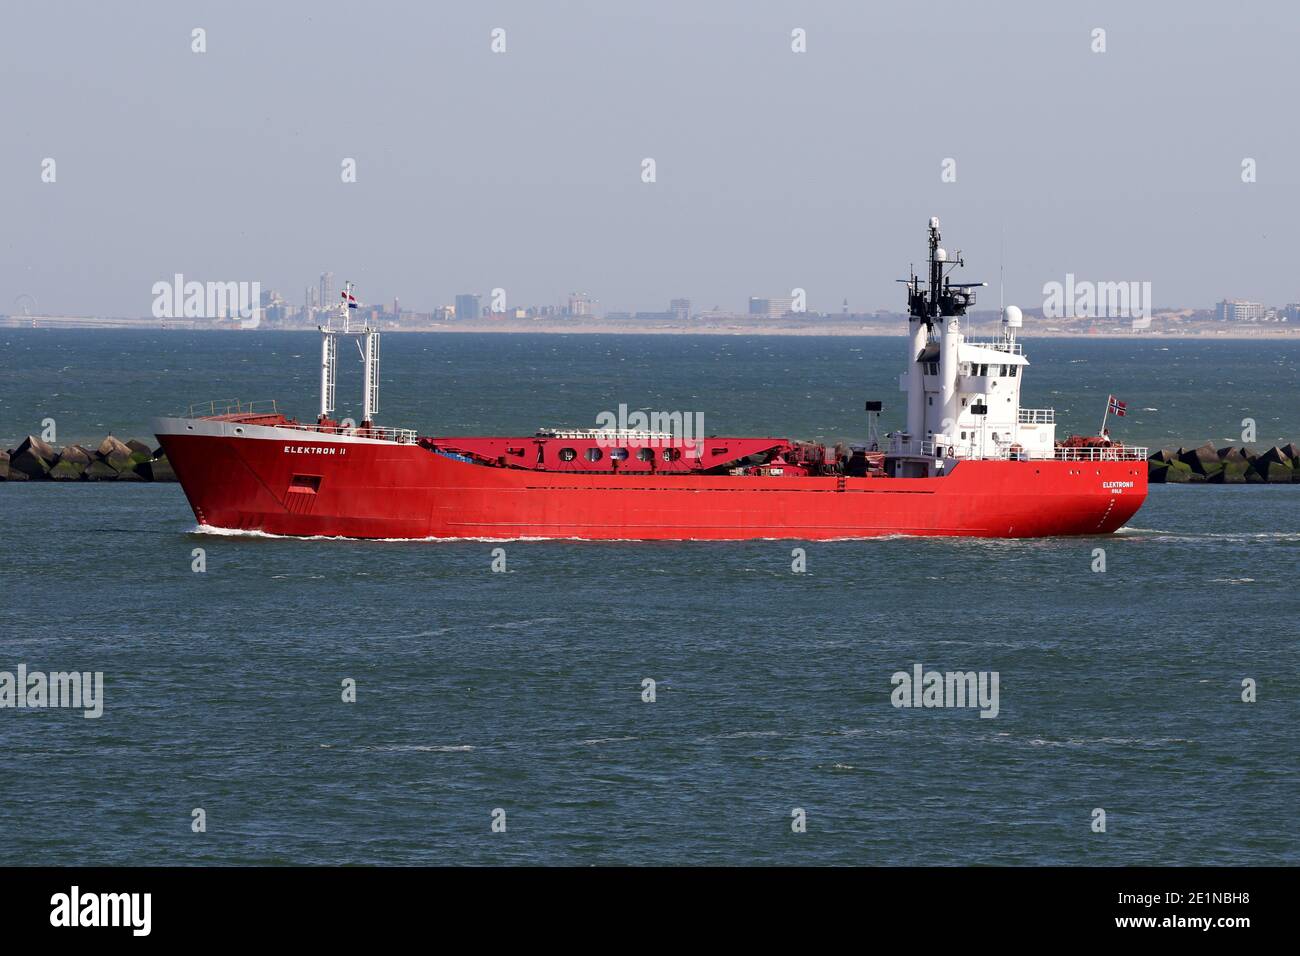 The old cargo ship Elektron II will leave the port of Rotterdam on September 18, 2020. Stock Photo